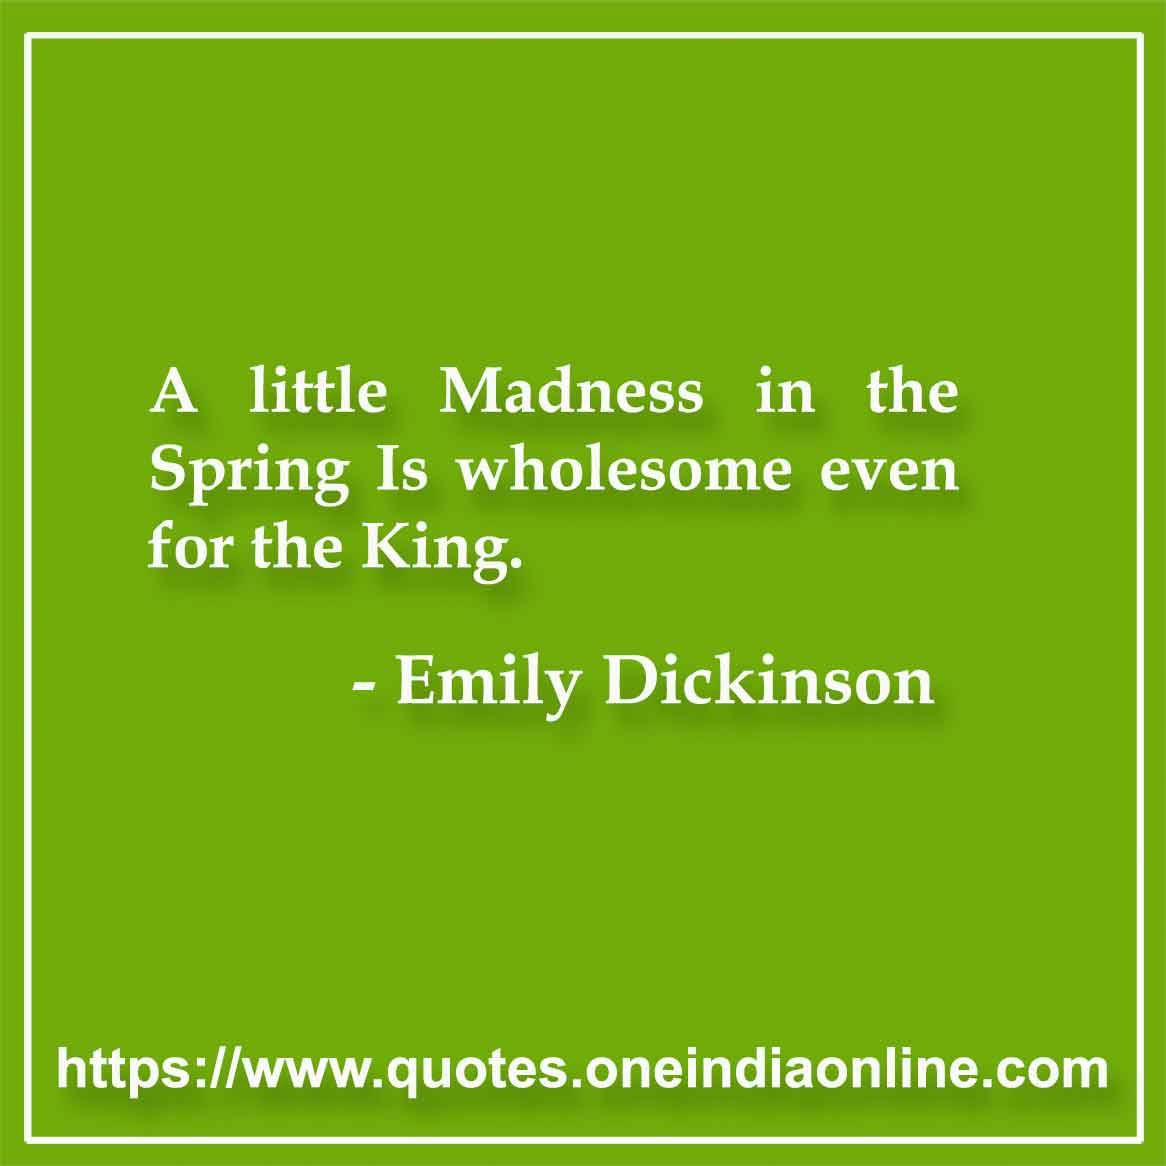 A little Madness in the Spring Is wholesome even for the King.

- Emily Dickinson